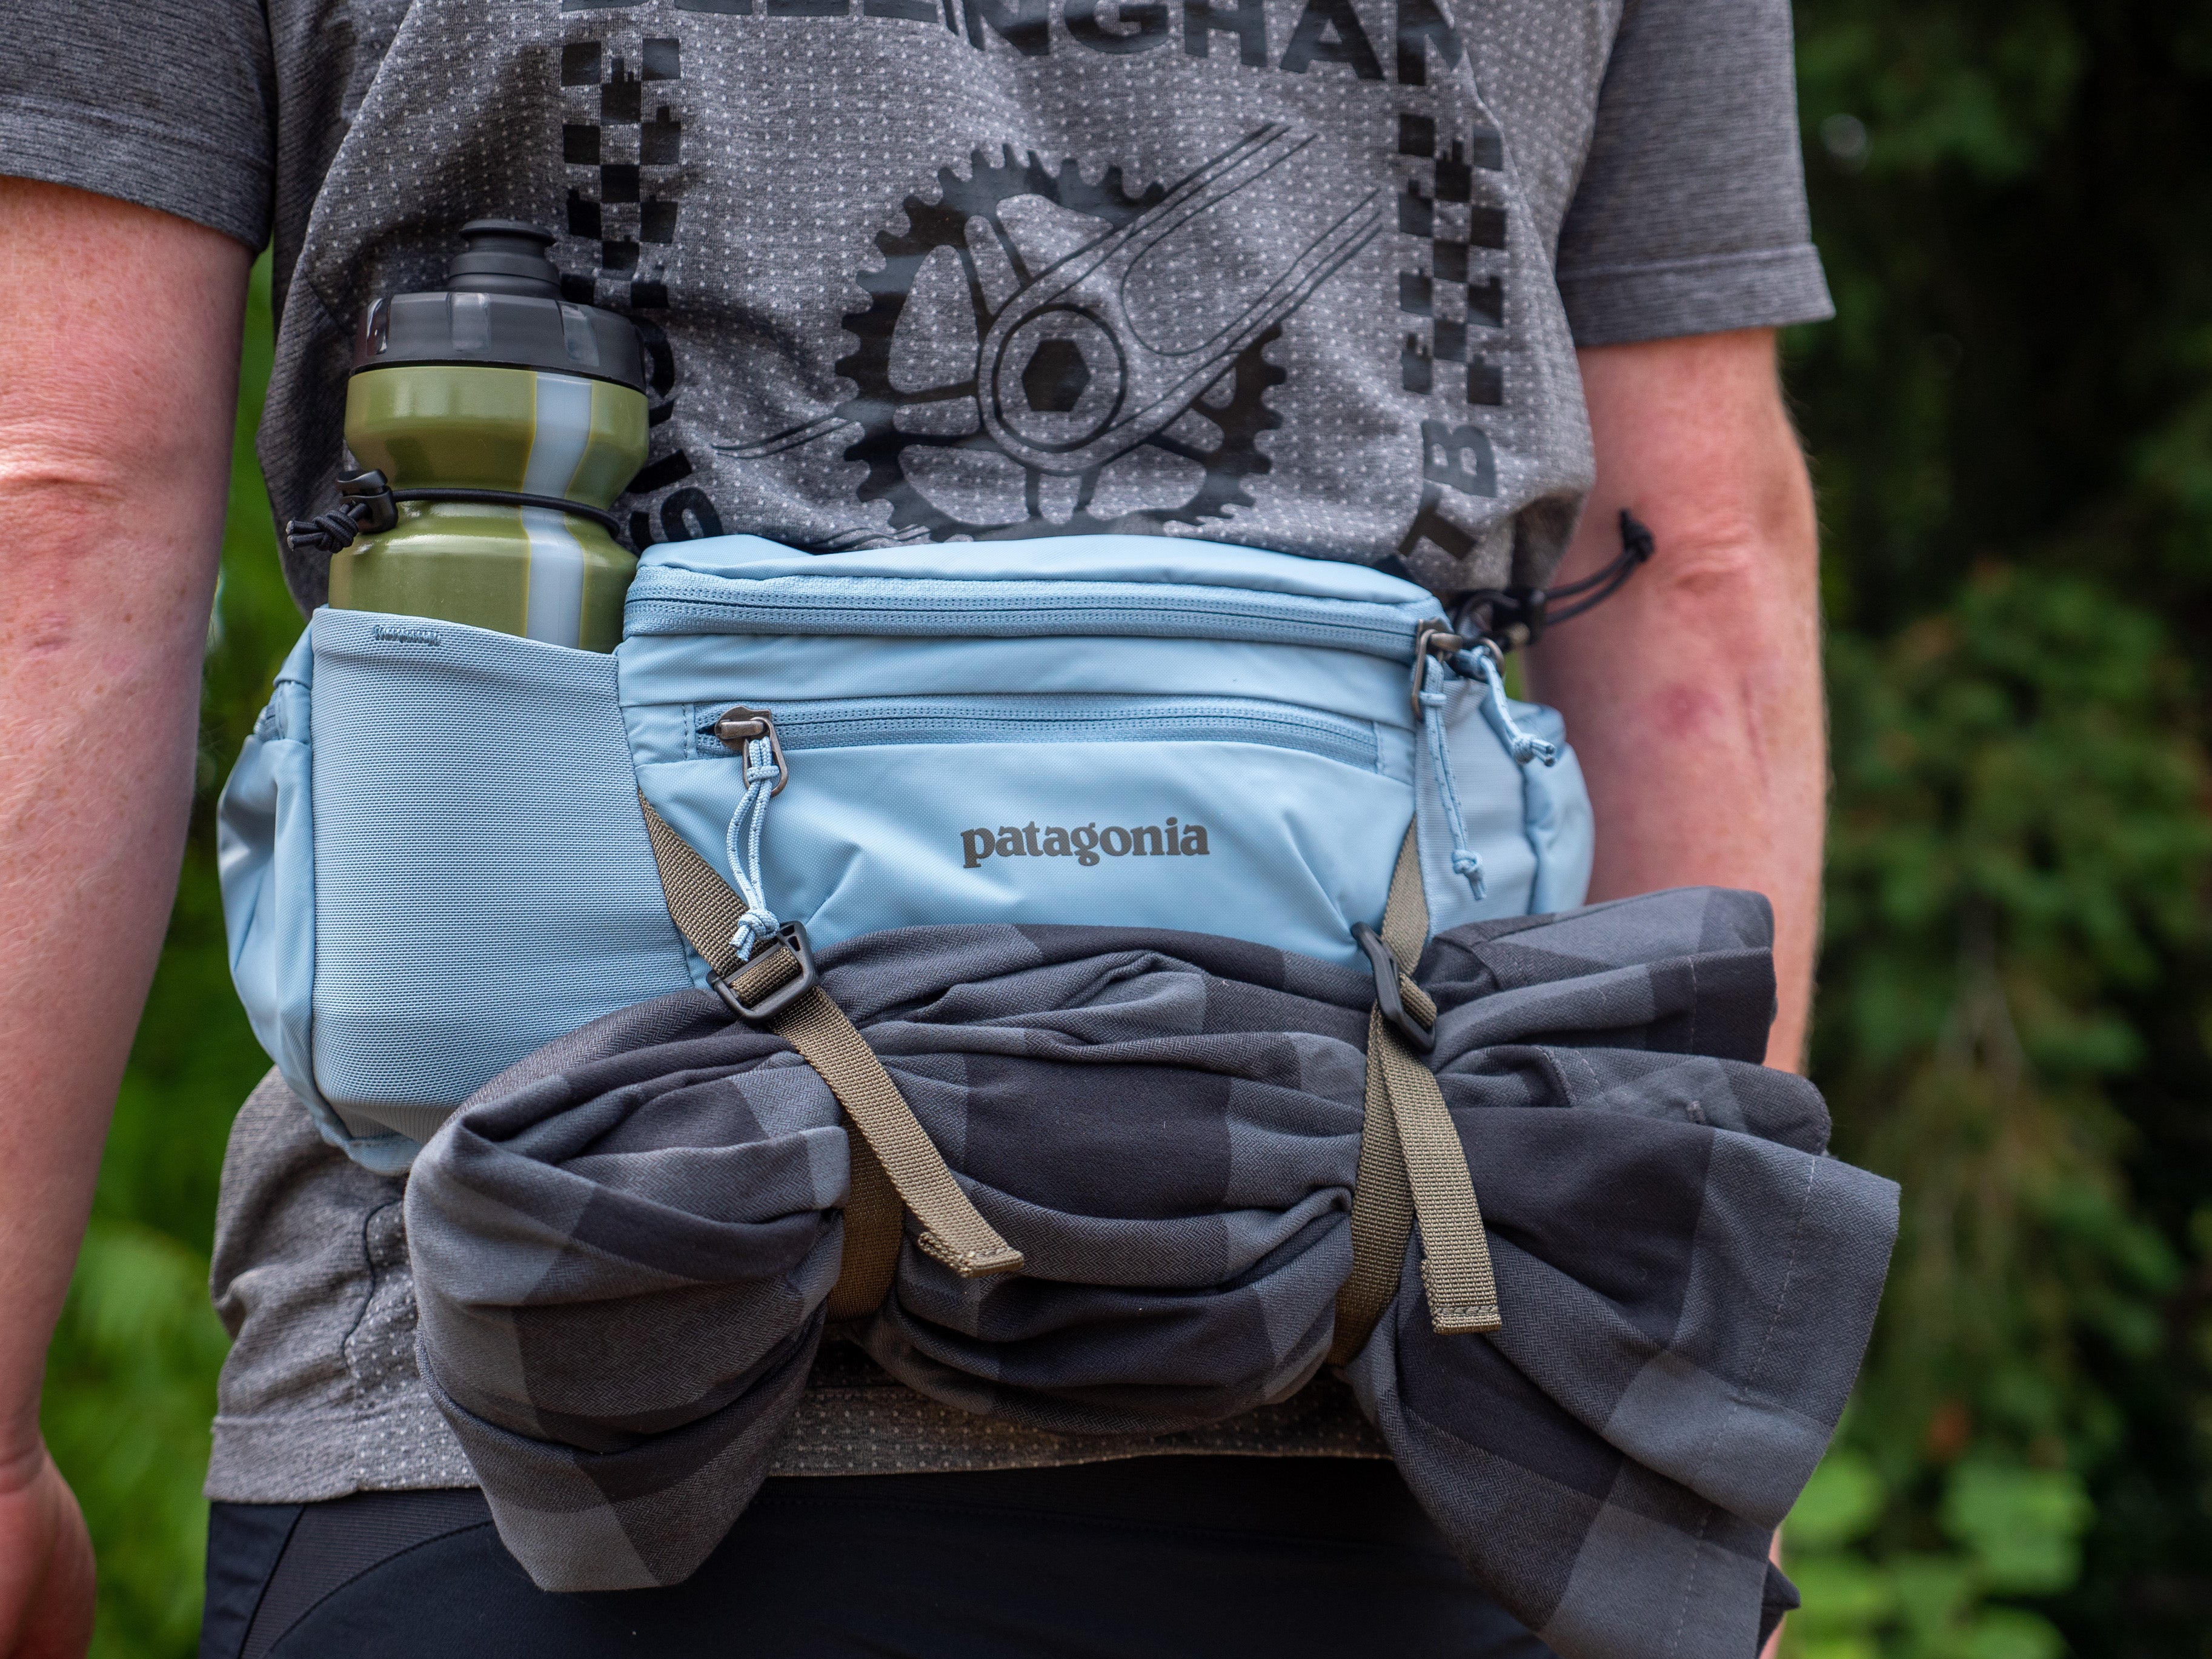 Patagonia mountain bike hip pack for sale